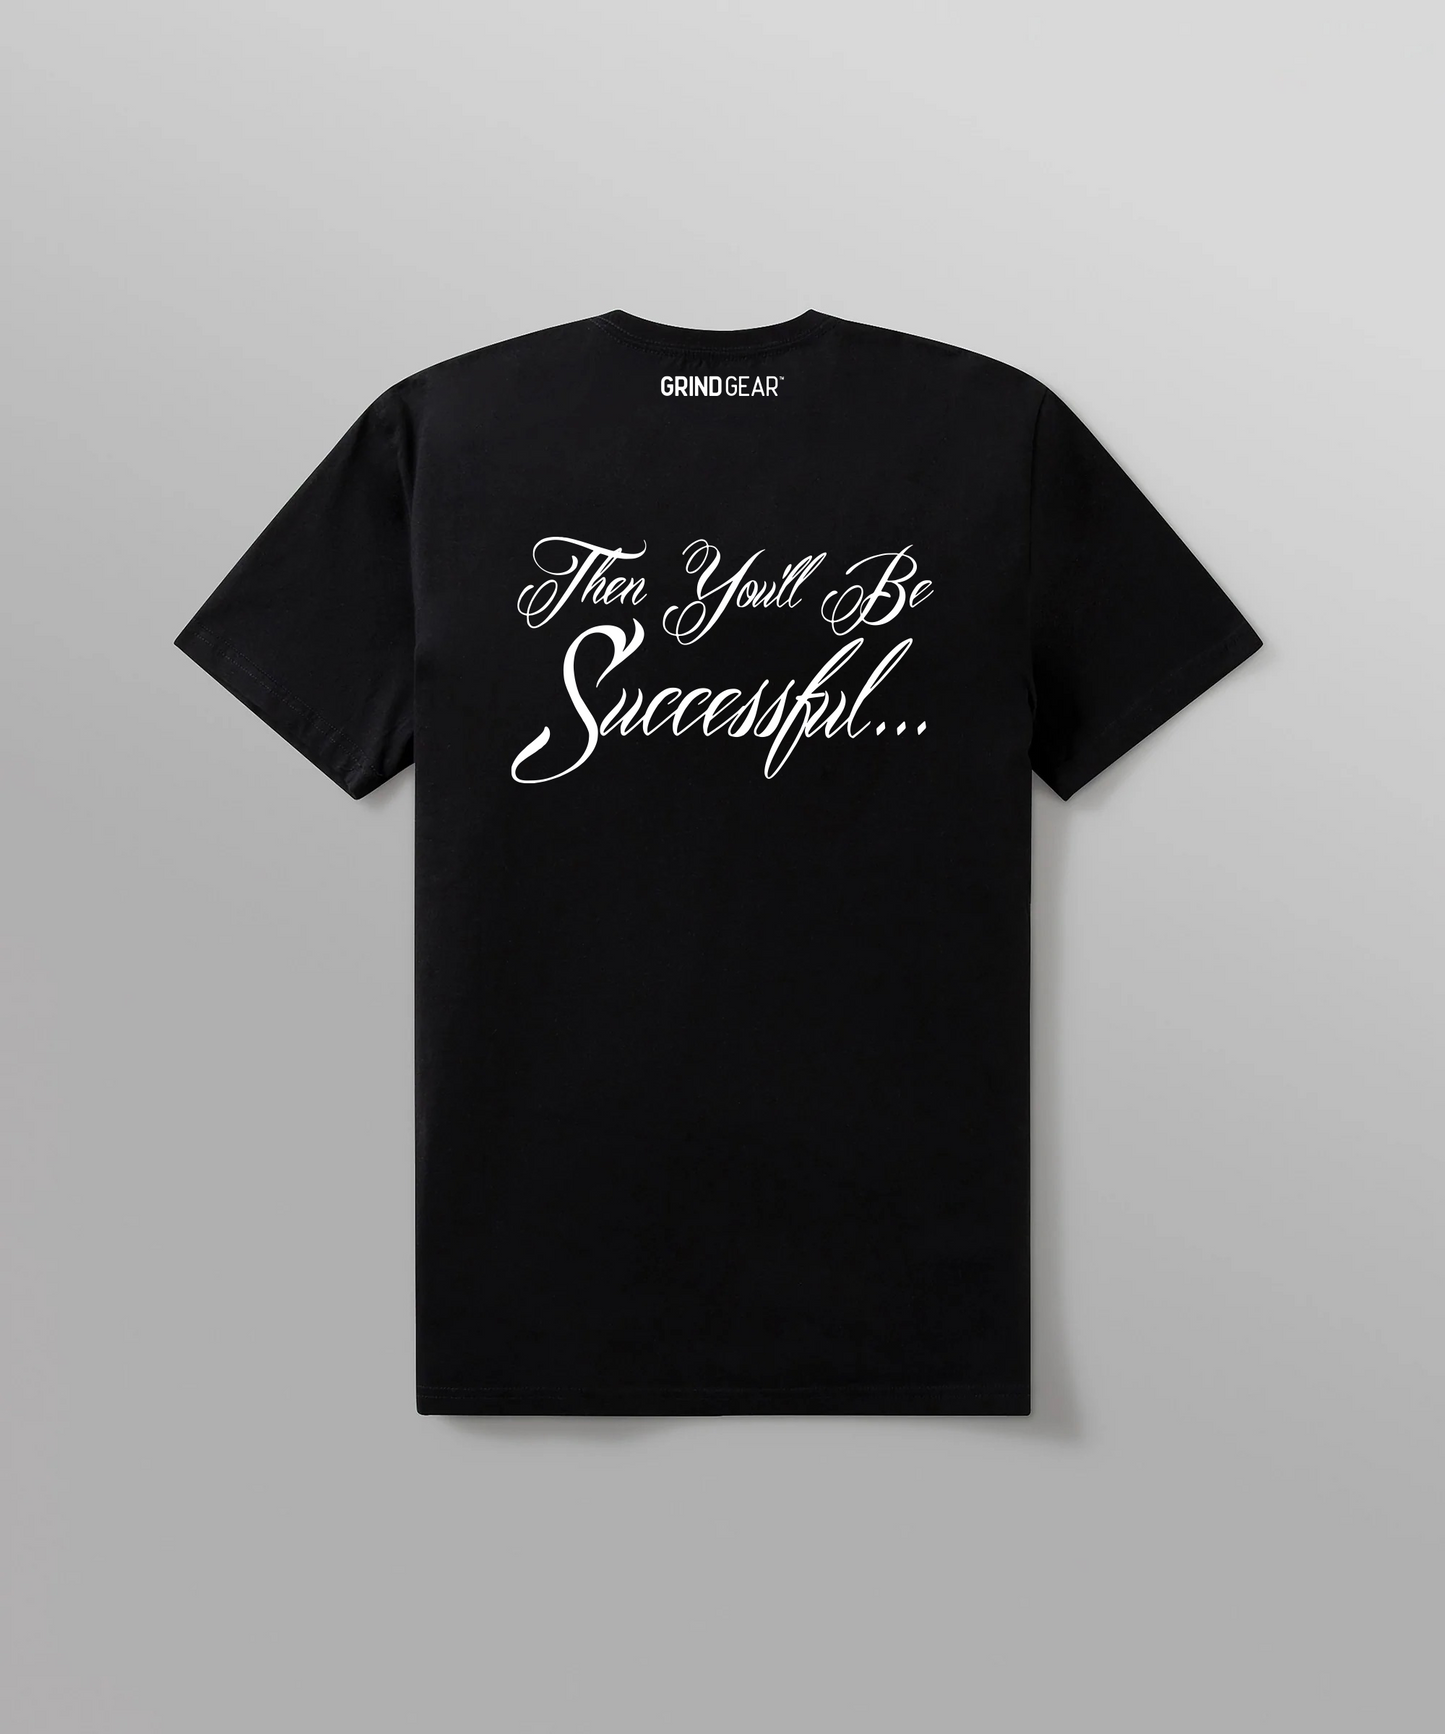 When You Wanna Succeed Classic Tee - Black